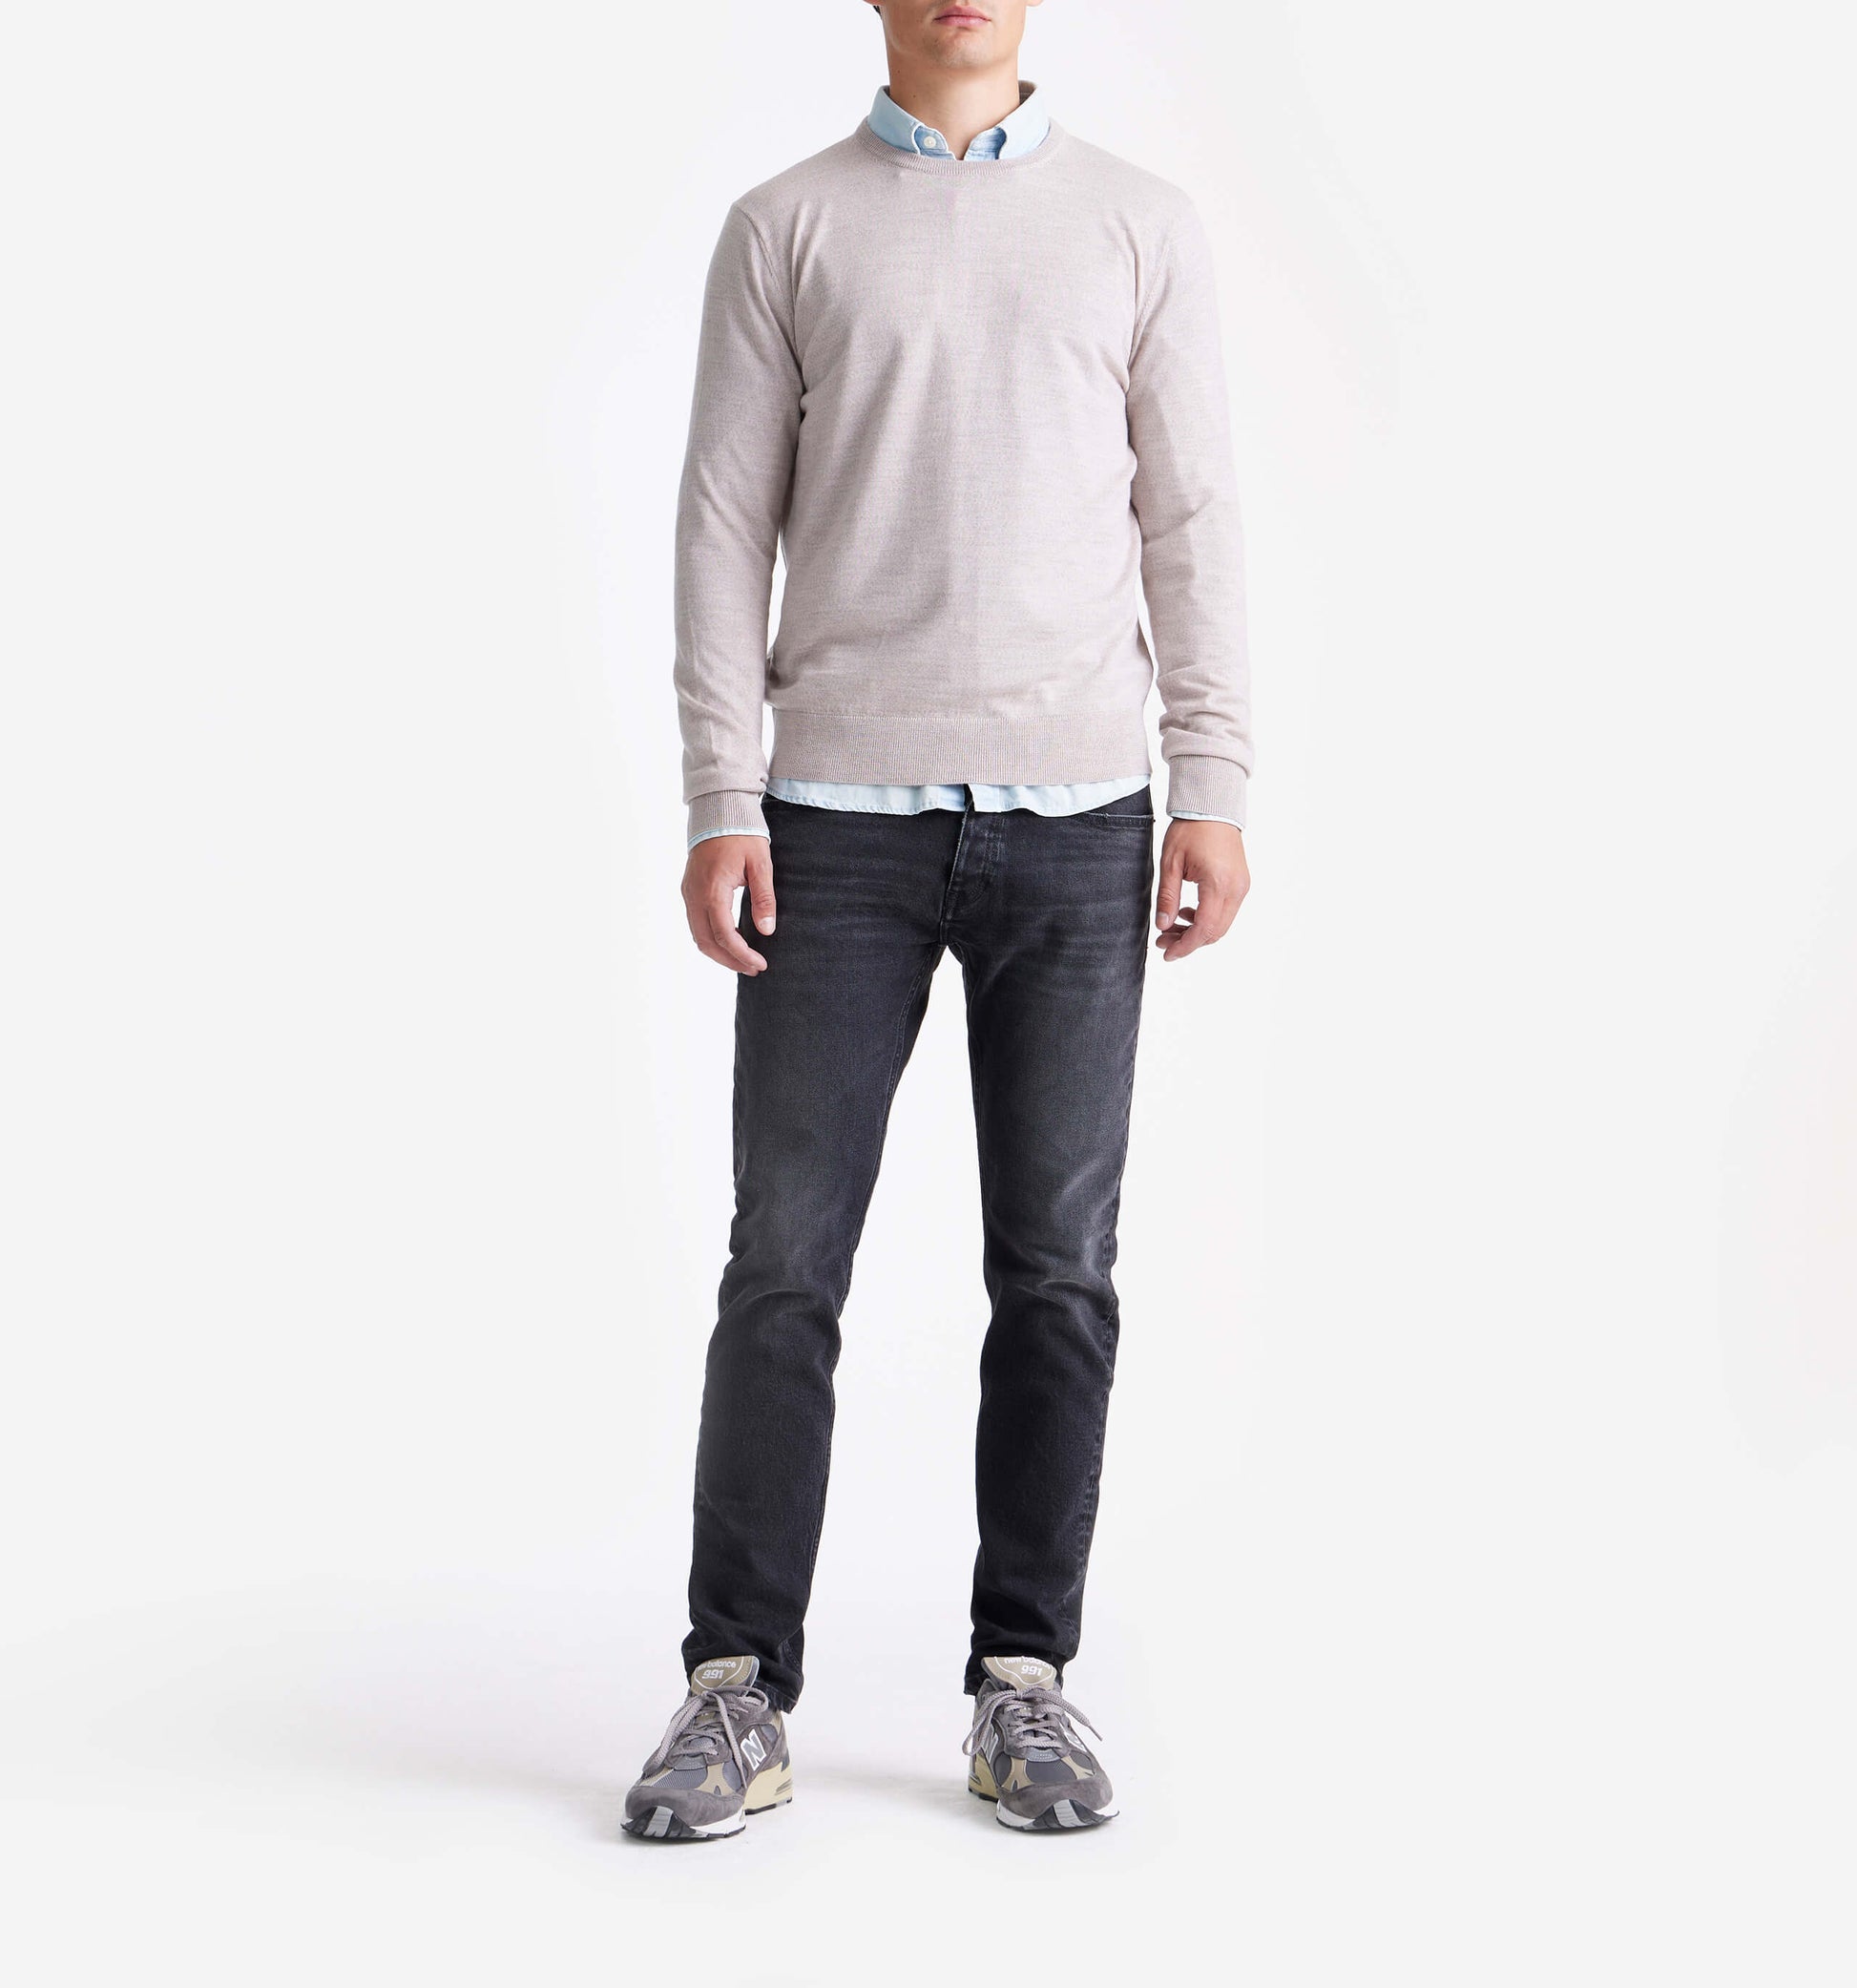 The John - Merino Wool Crewneck In Light Brown From King Essentials